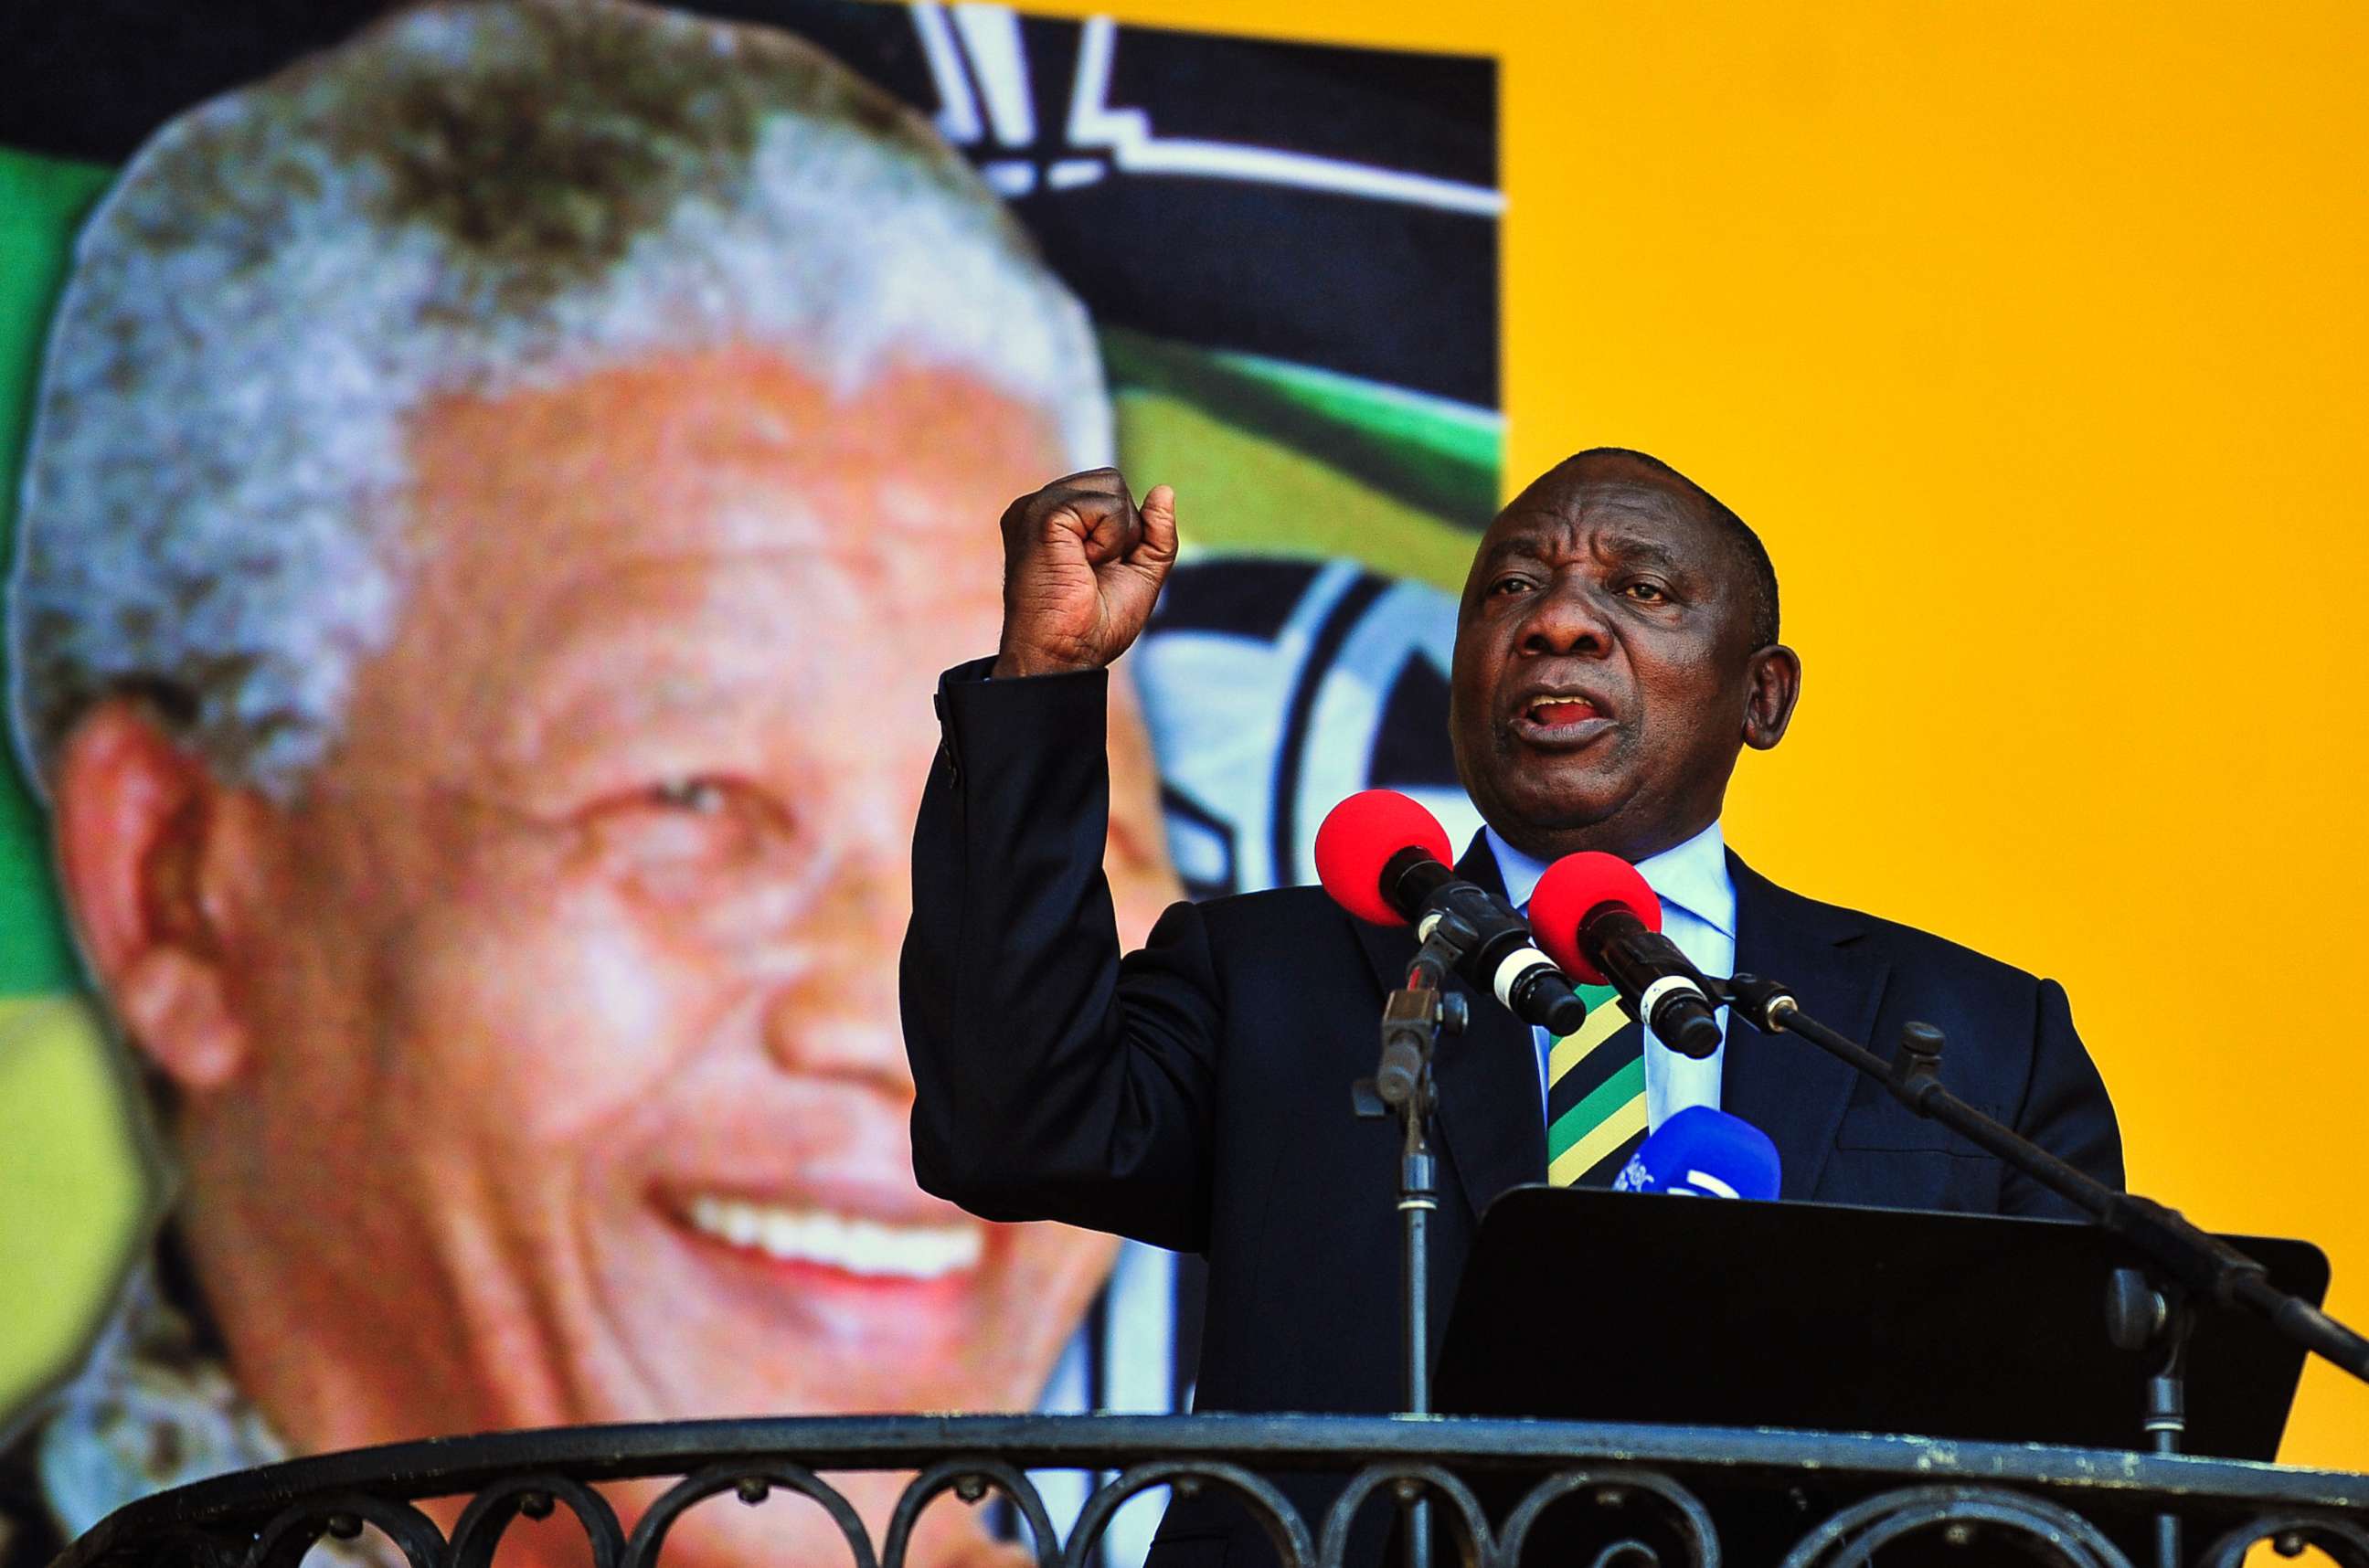 PHOTO: South African Deputy President and African National Congress party President Cyril Ramaphosa, delivers a speech at the Grand Parade in Cape Town, South Africa, Feb. 11, 2018.